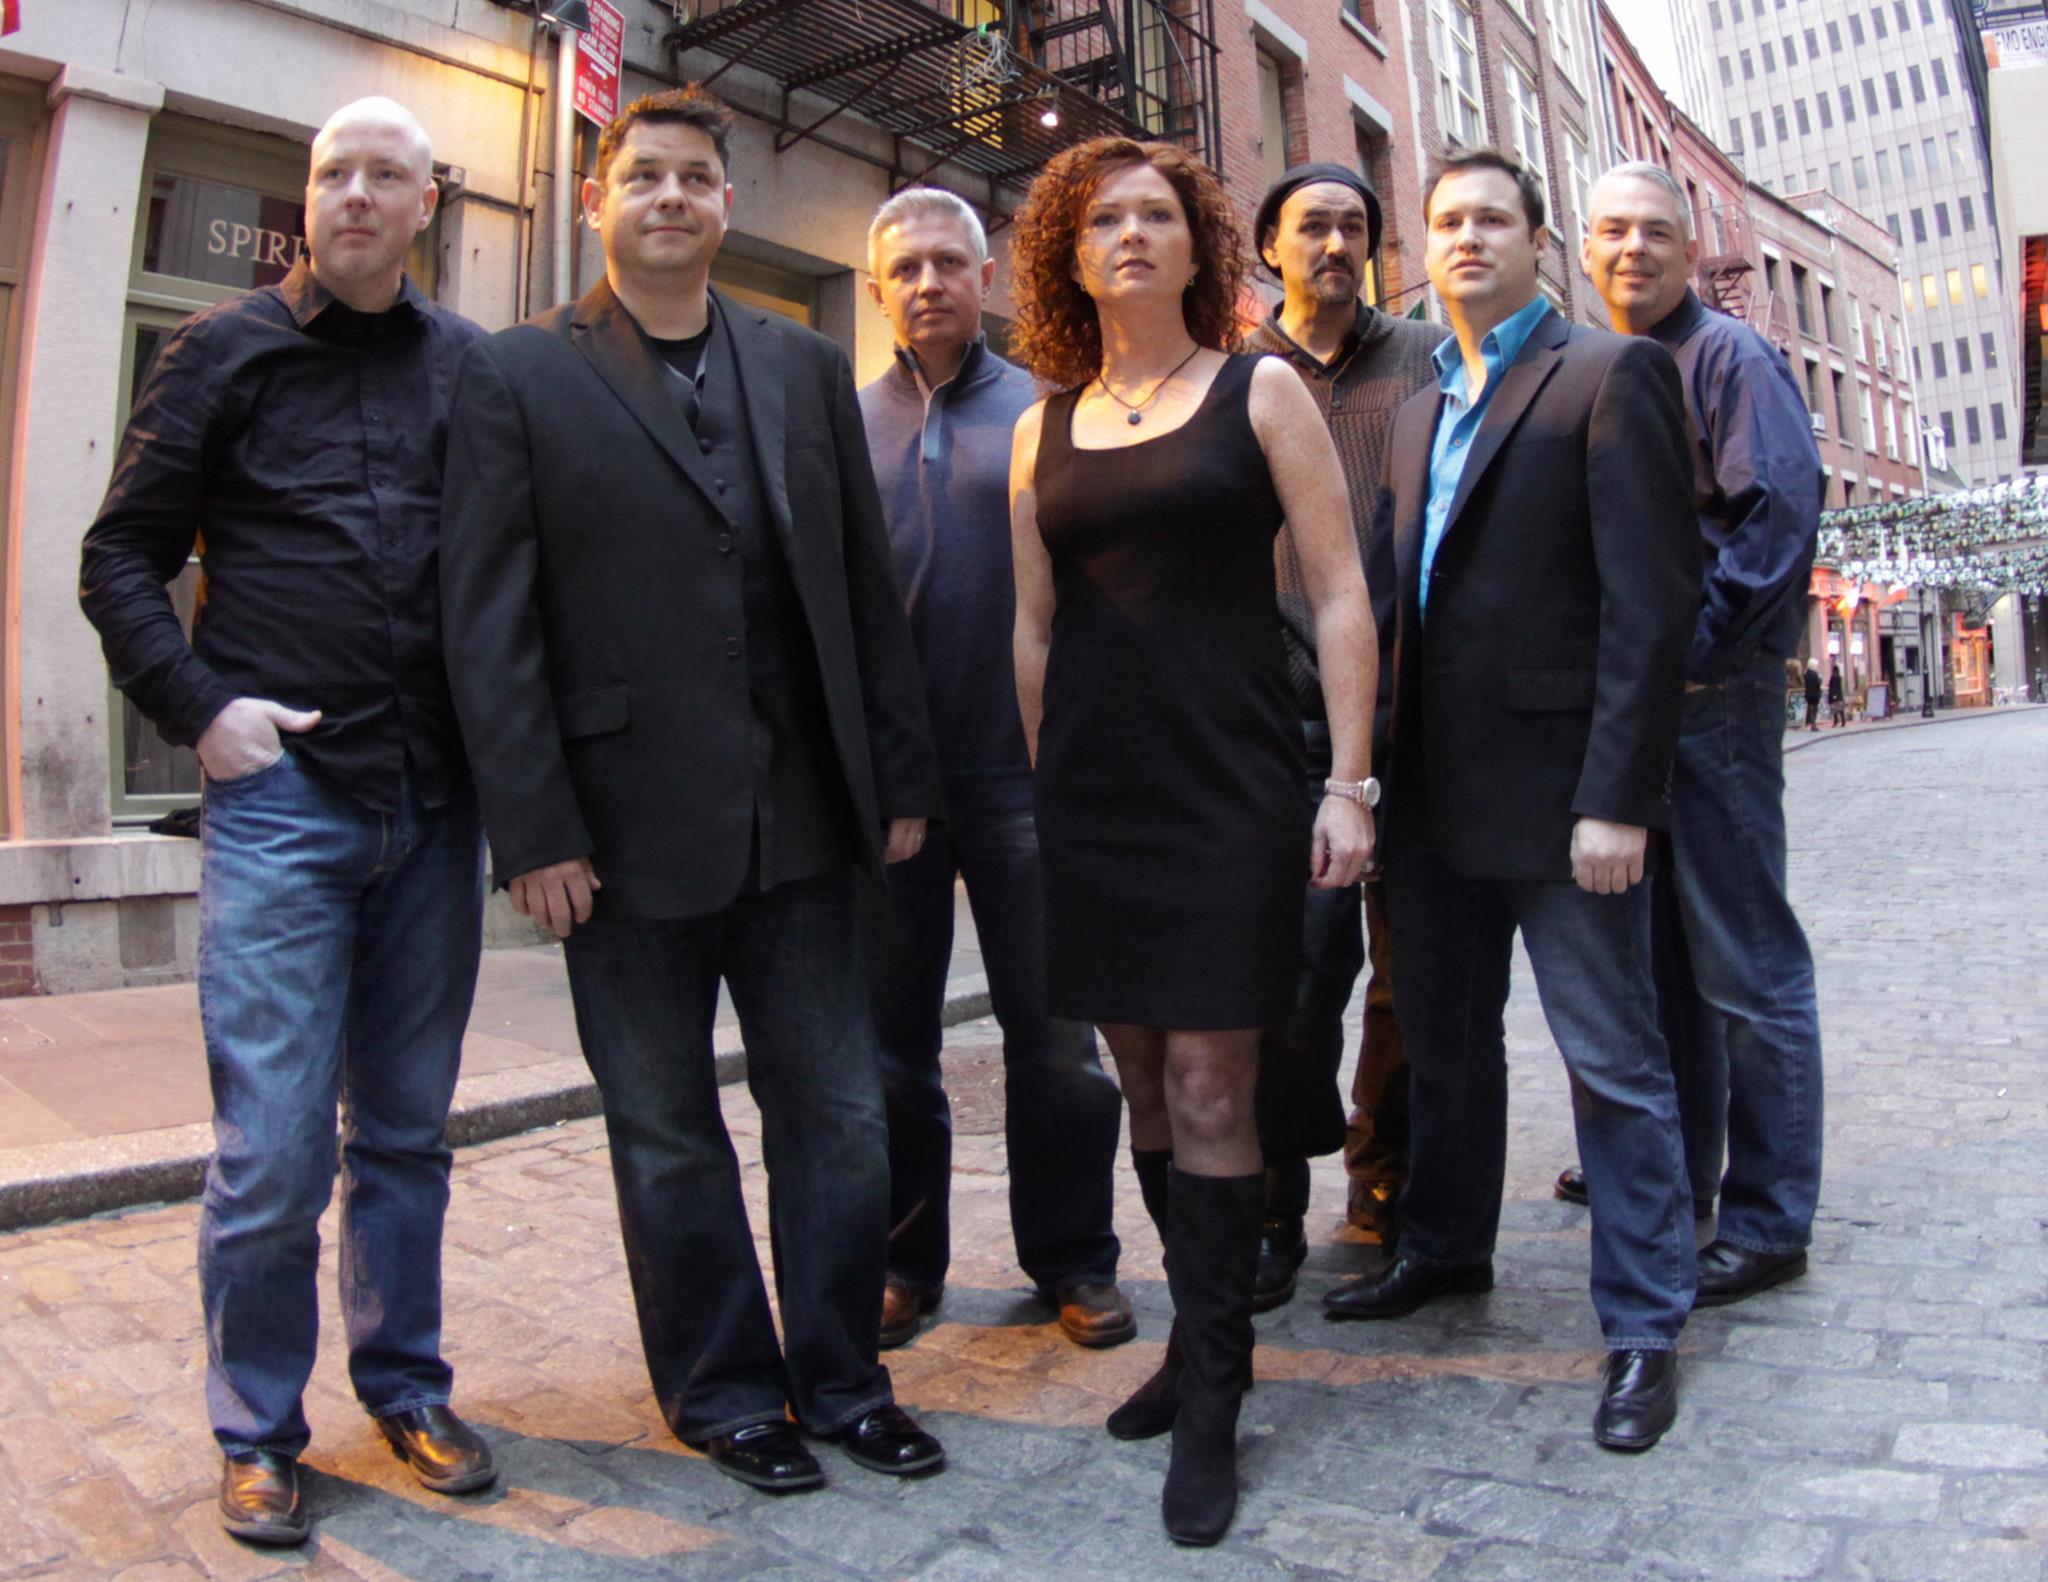 Celtic Cross, a family band that’s been memorialising modern-day Irish immigration and the succeeding Irish-American experience since 1990